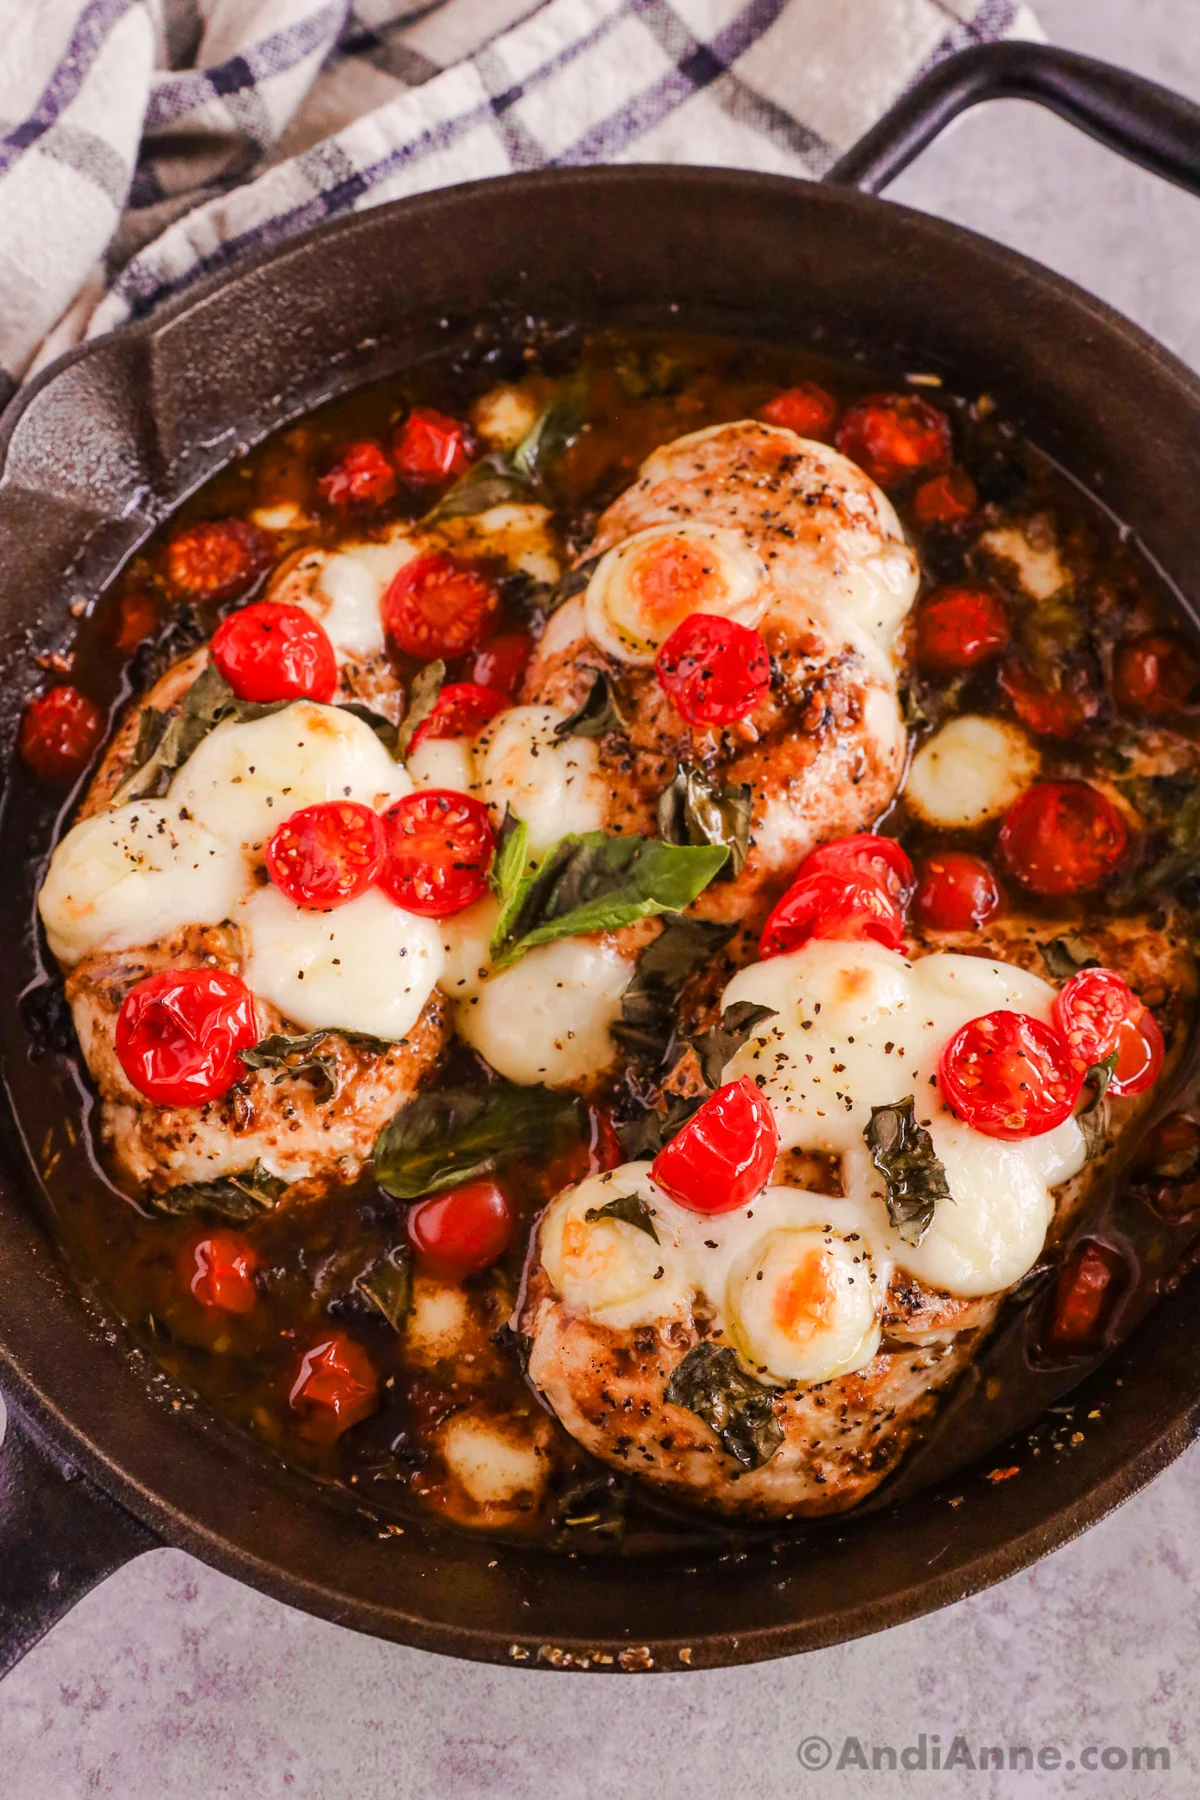 Cast iron skillet with basil balsamic chicken recipe inside.